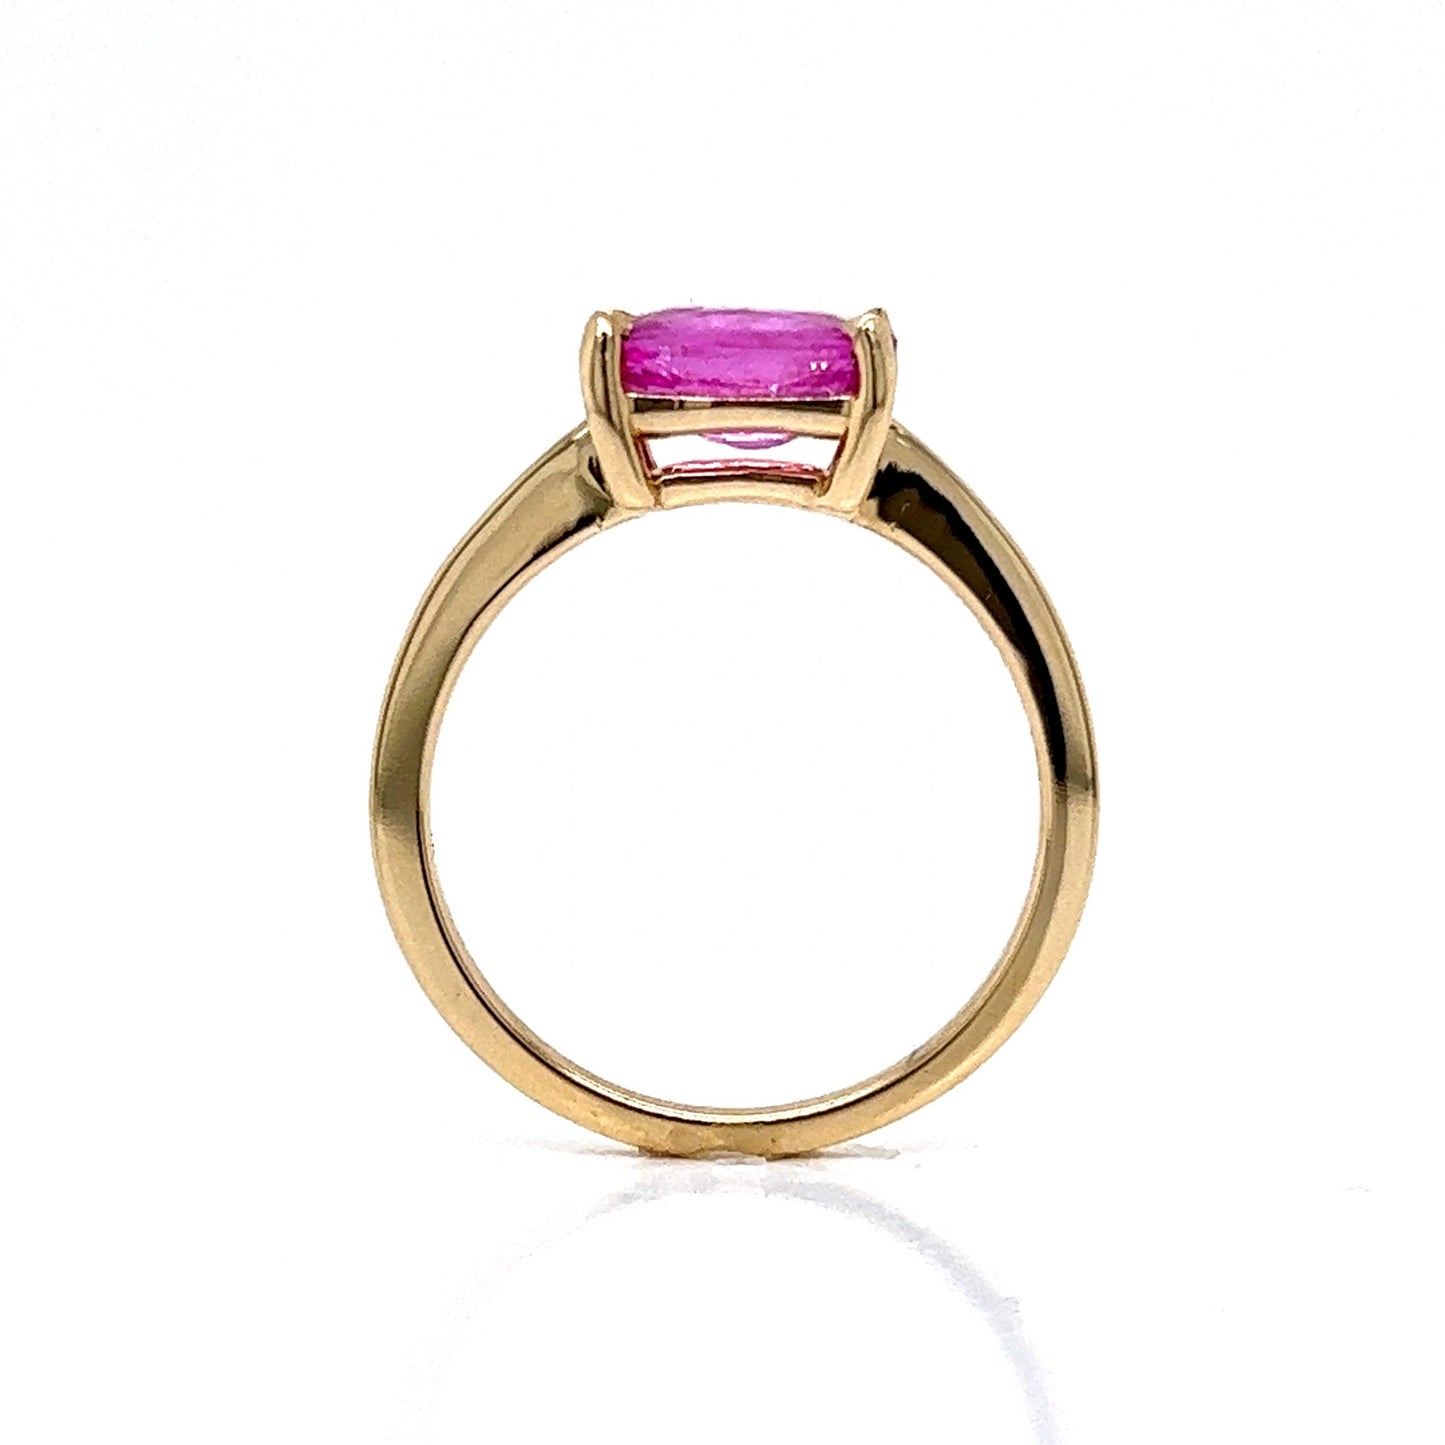 Oval Cut Pink Sapphire Engagement Ring in 14k Yellow Gold